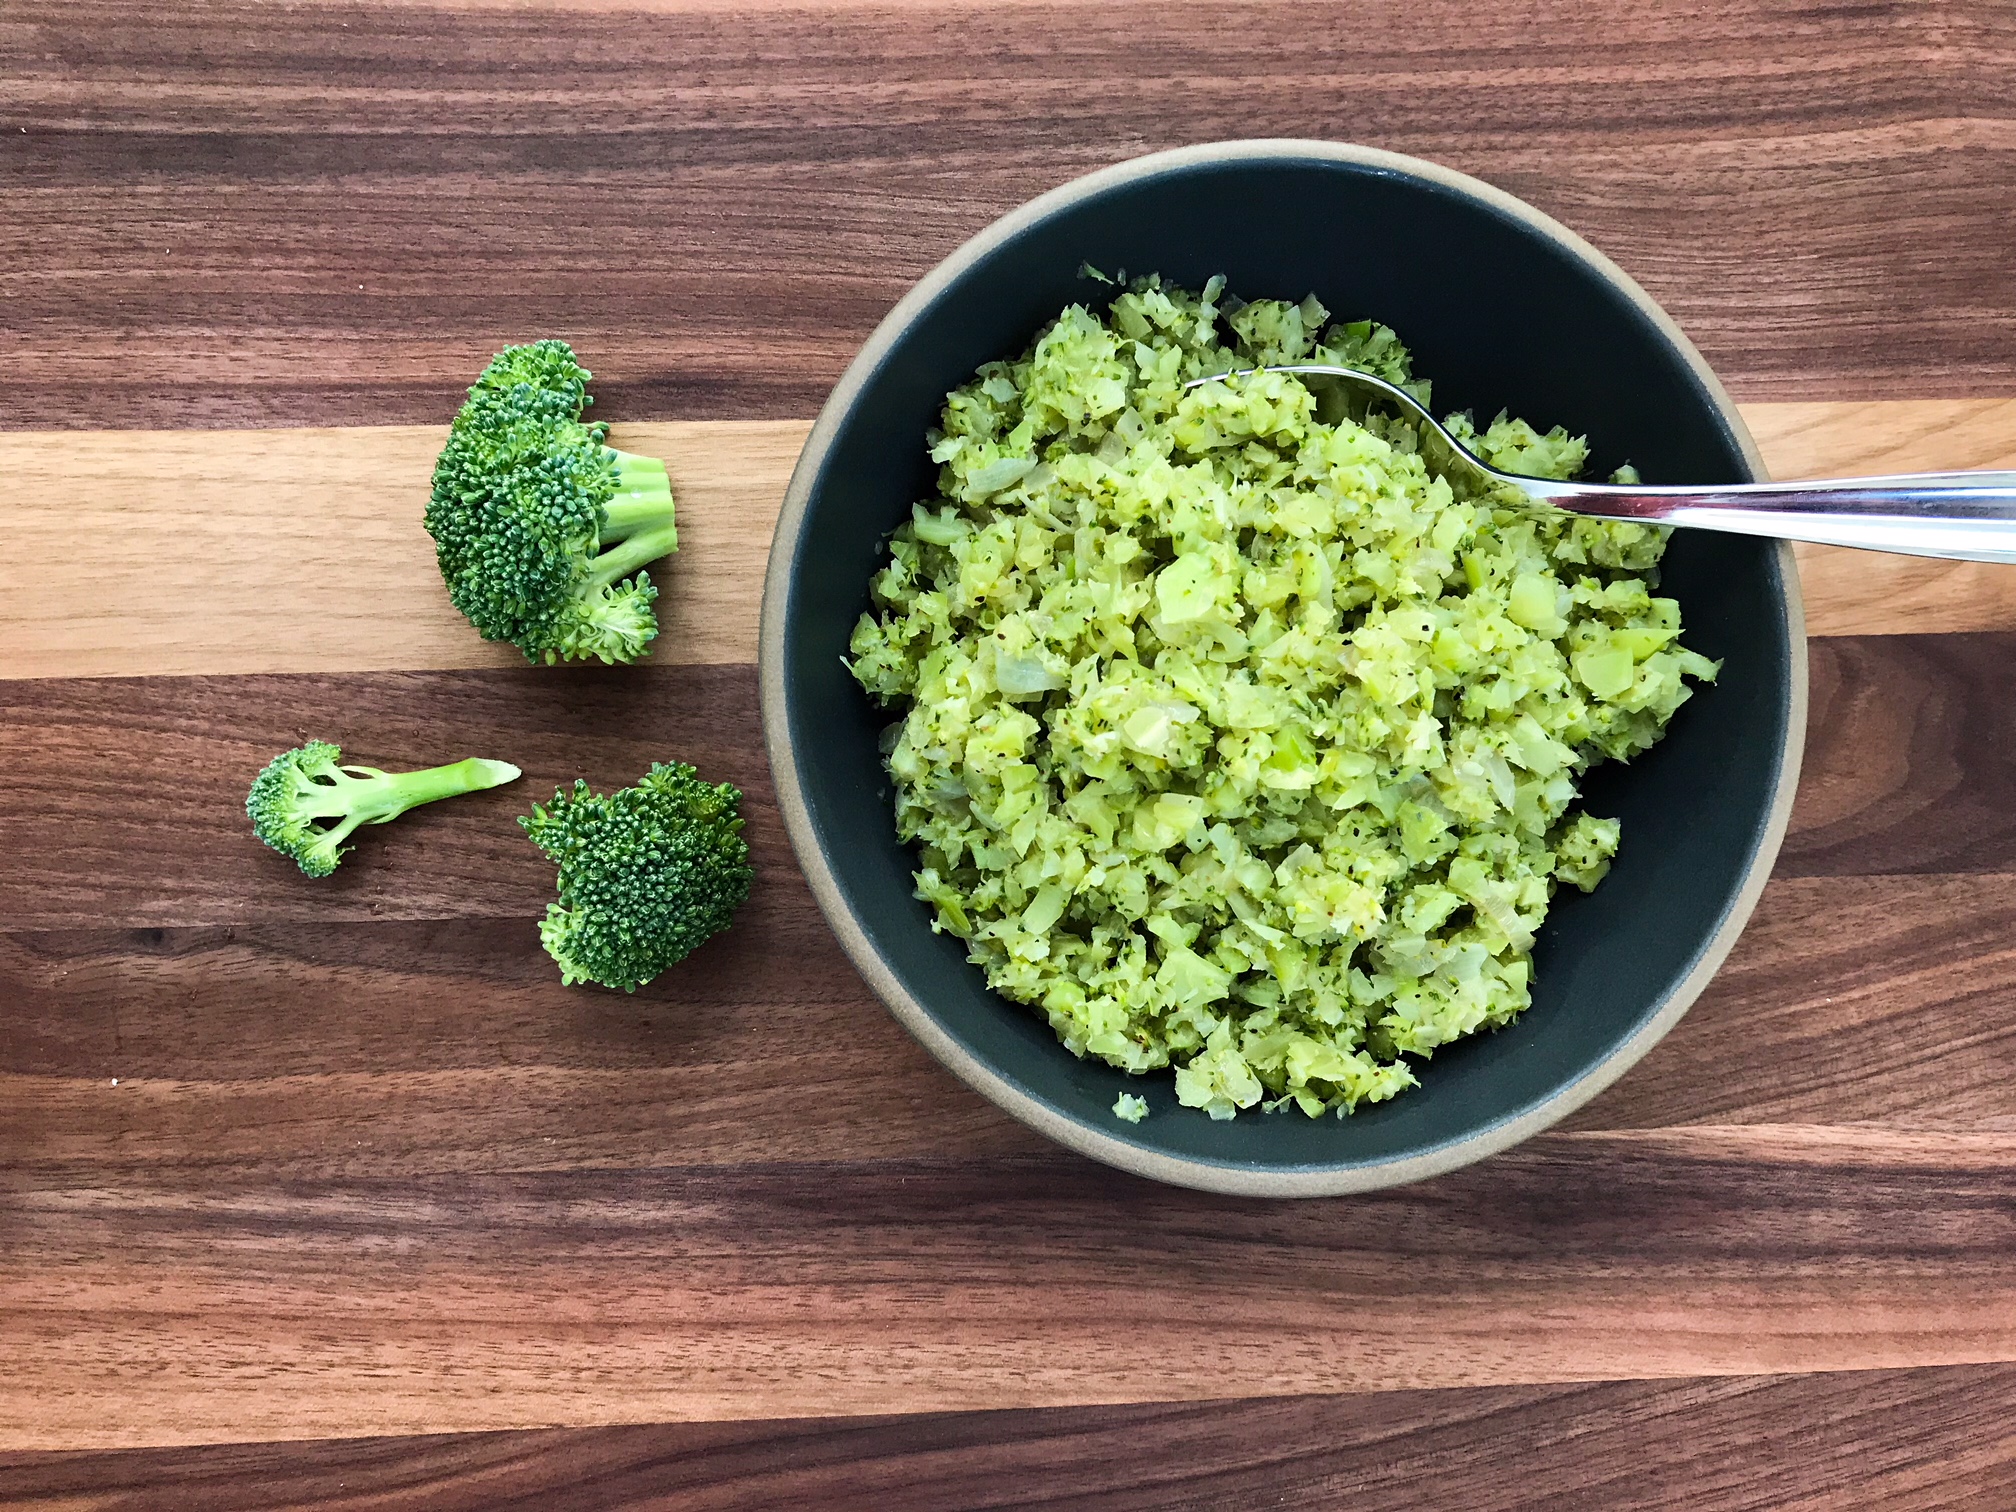 Riced Broccoli (and Stems!) | Paleo, Whole30, Low-carb | The Real Food Effect by Candace Kennedy, Holistic Nutritionist